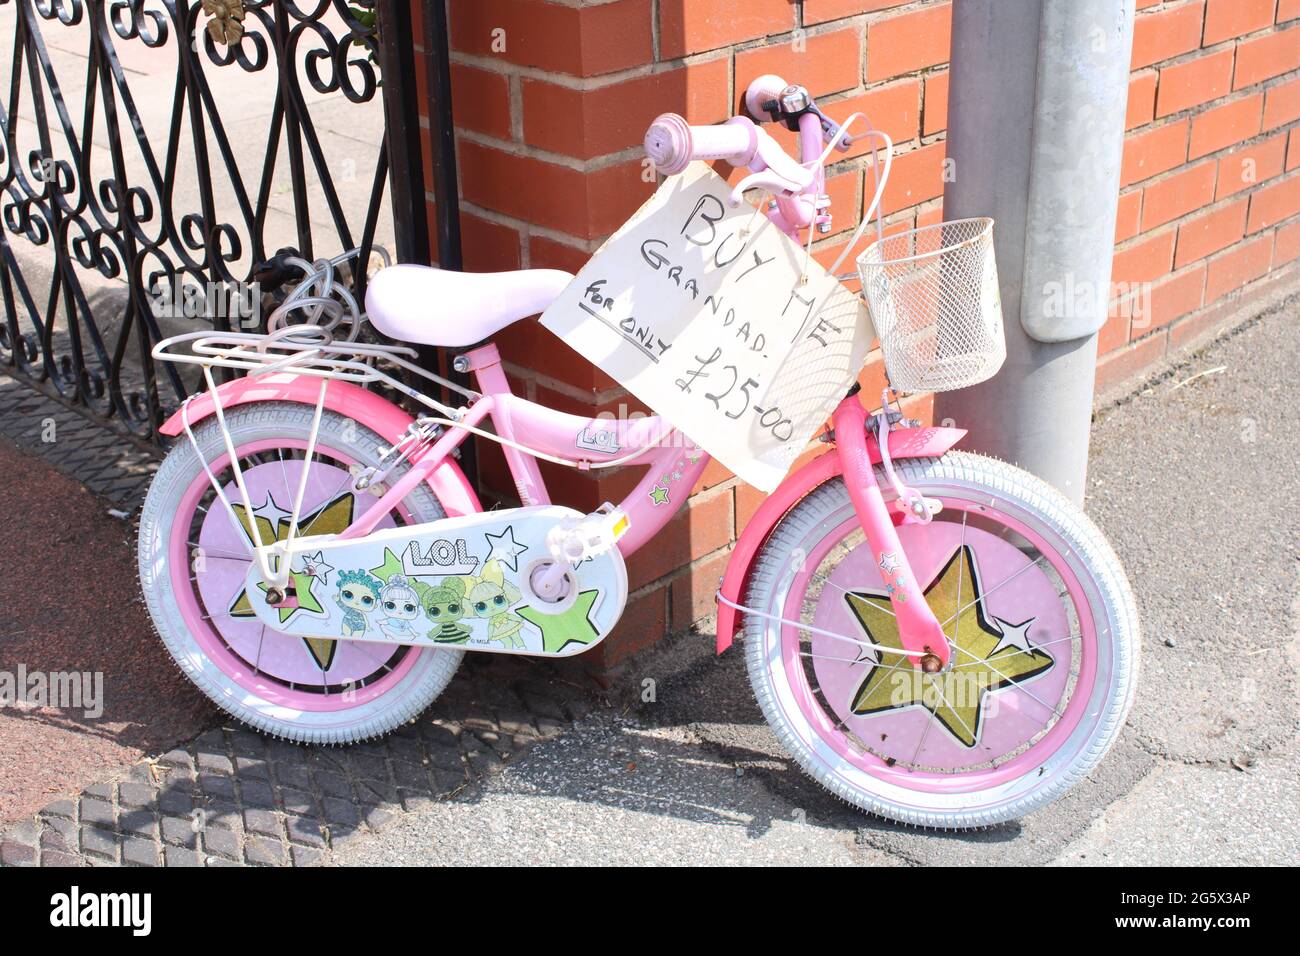 Childs pink bicycle with sale sign saying 'Buy me Grandad for only £25.00'. Clever advertising concept Stock Photo